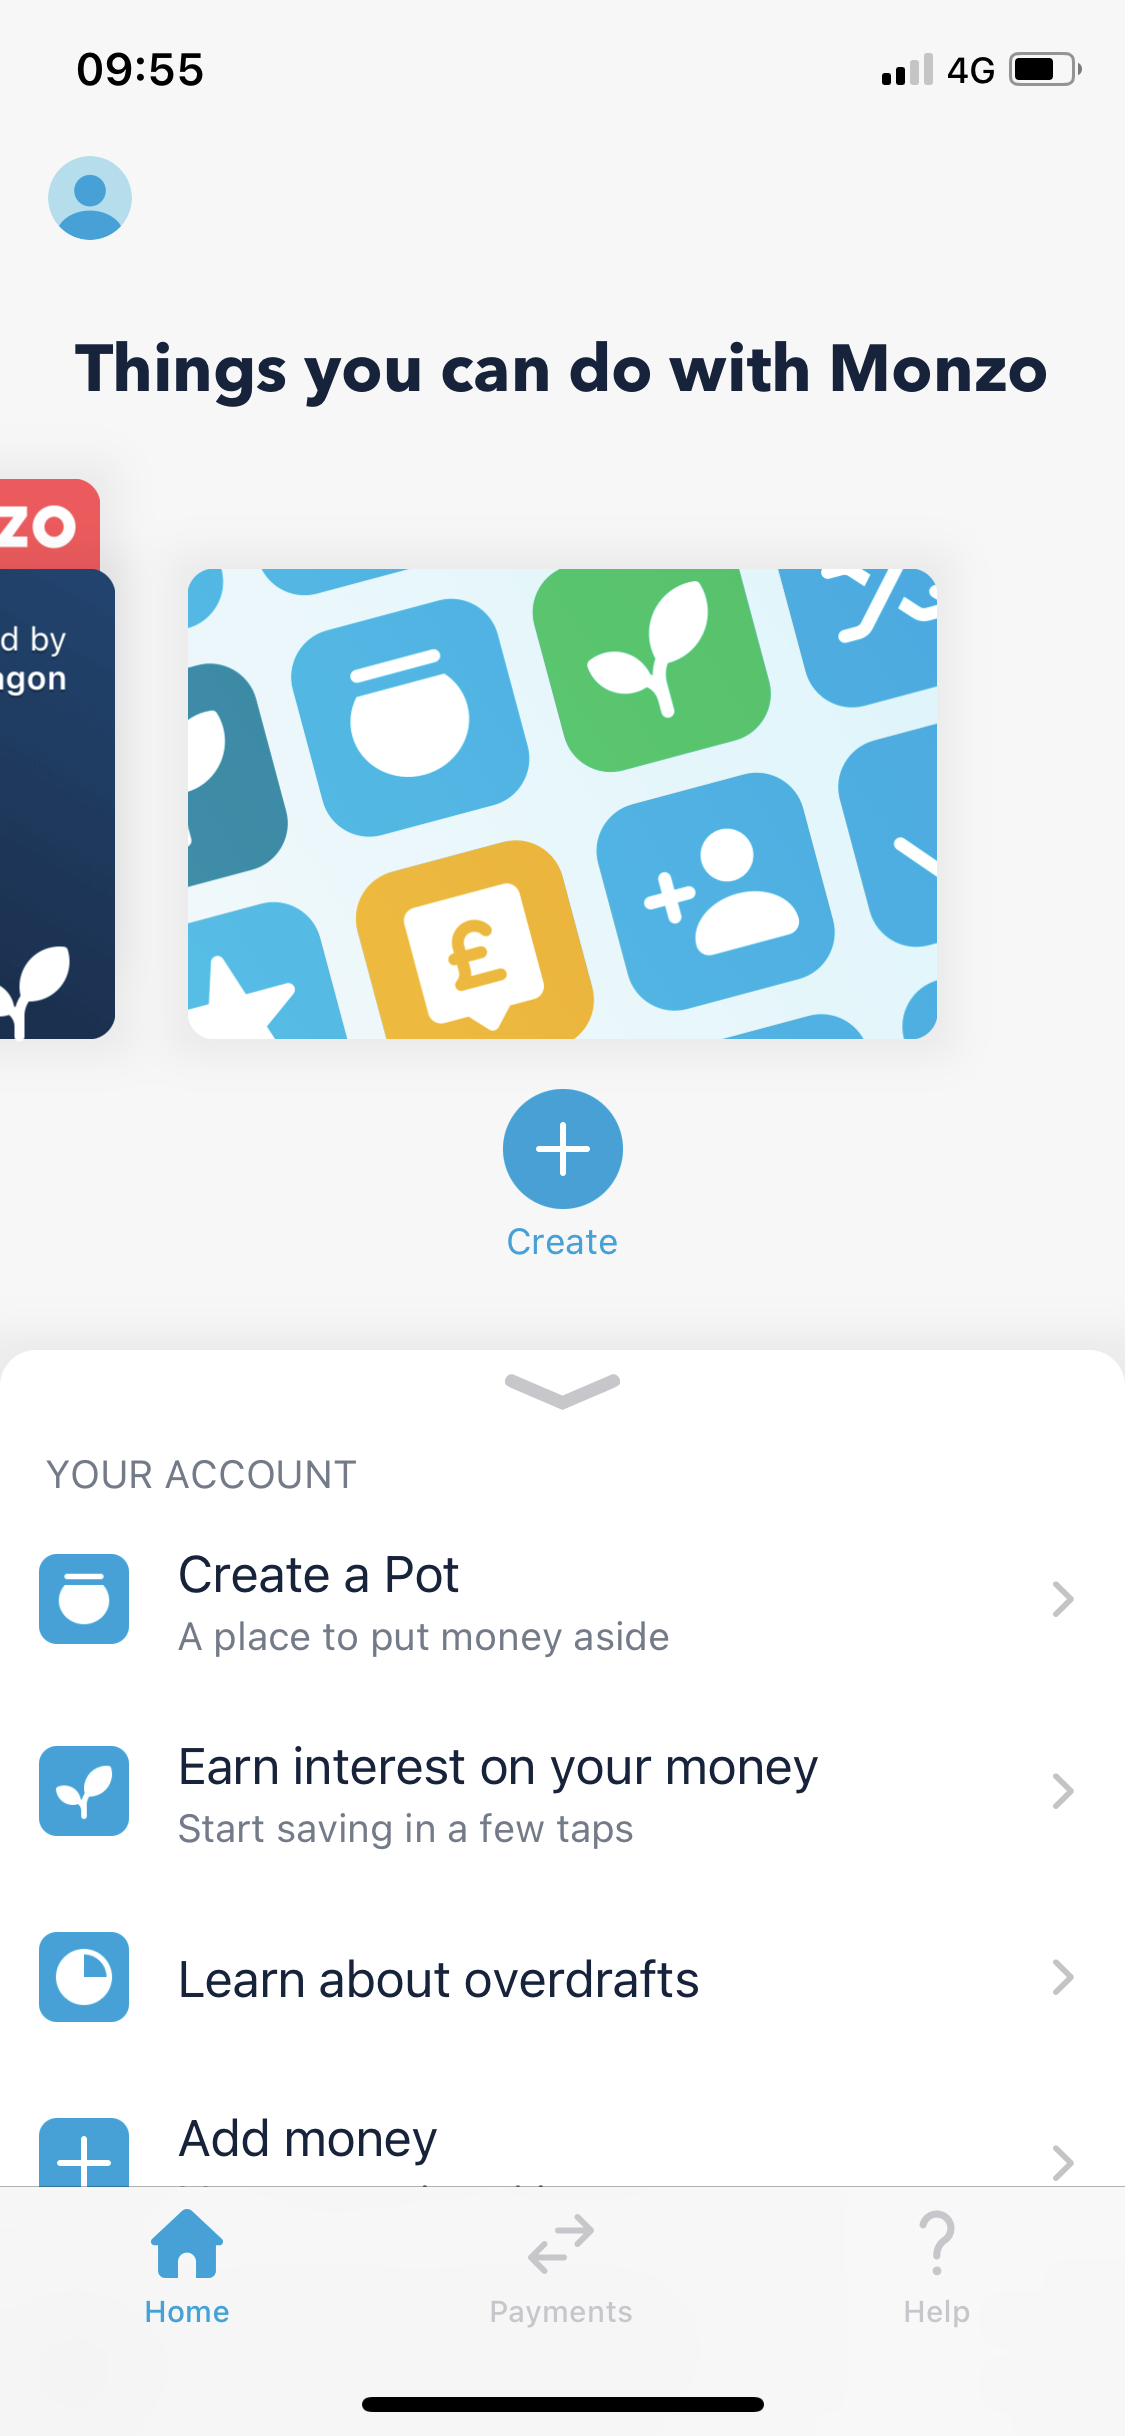 Screenshot of Things you can do on Creating a pot on Monzo user flow